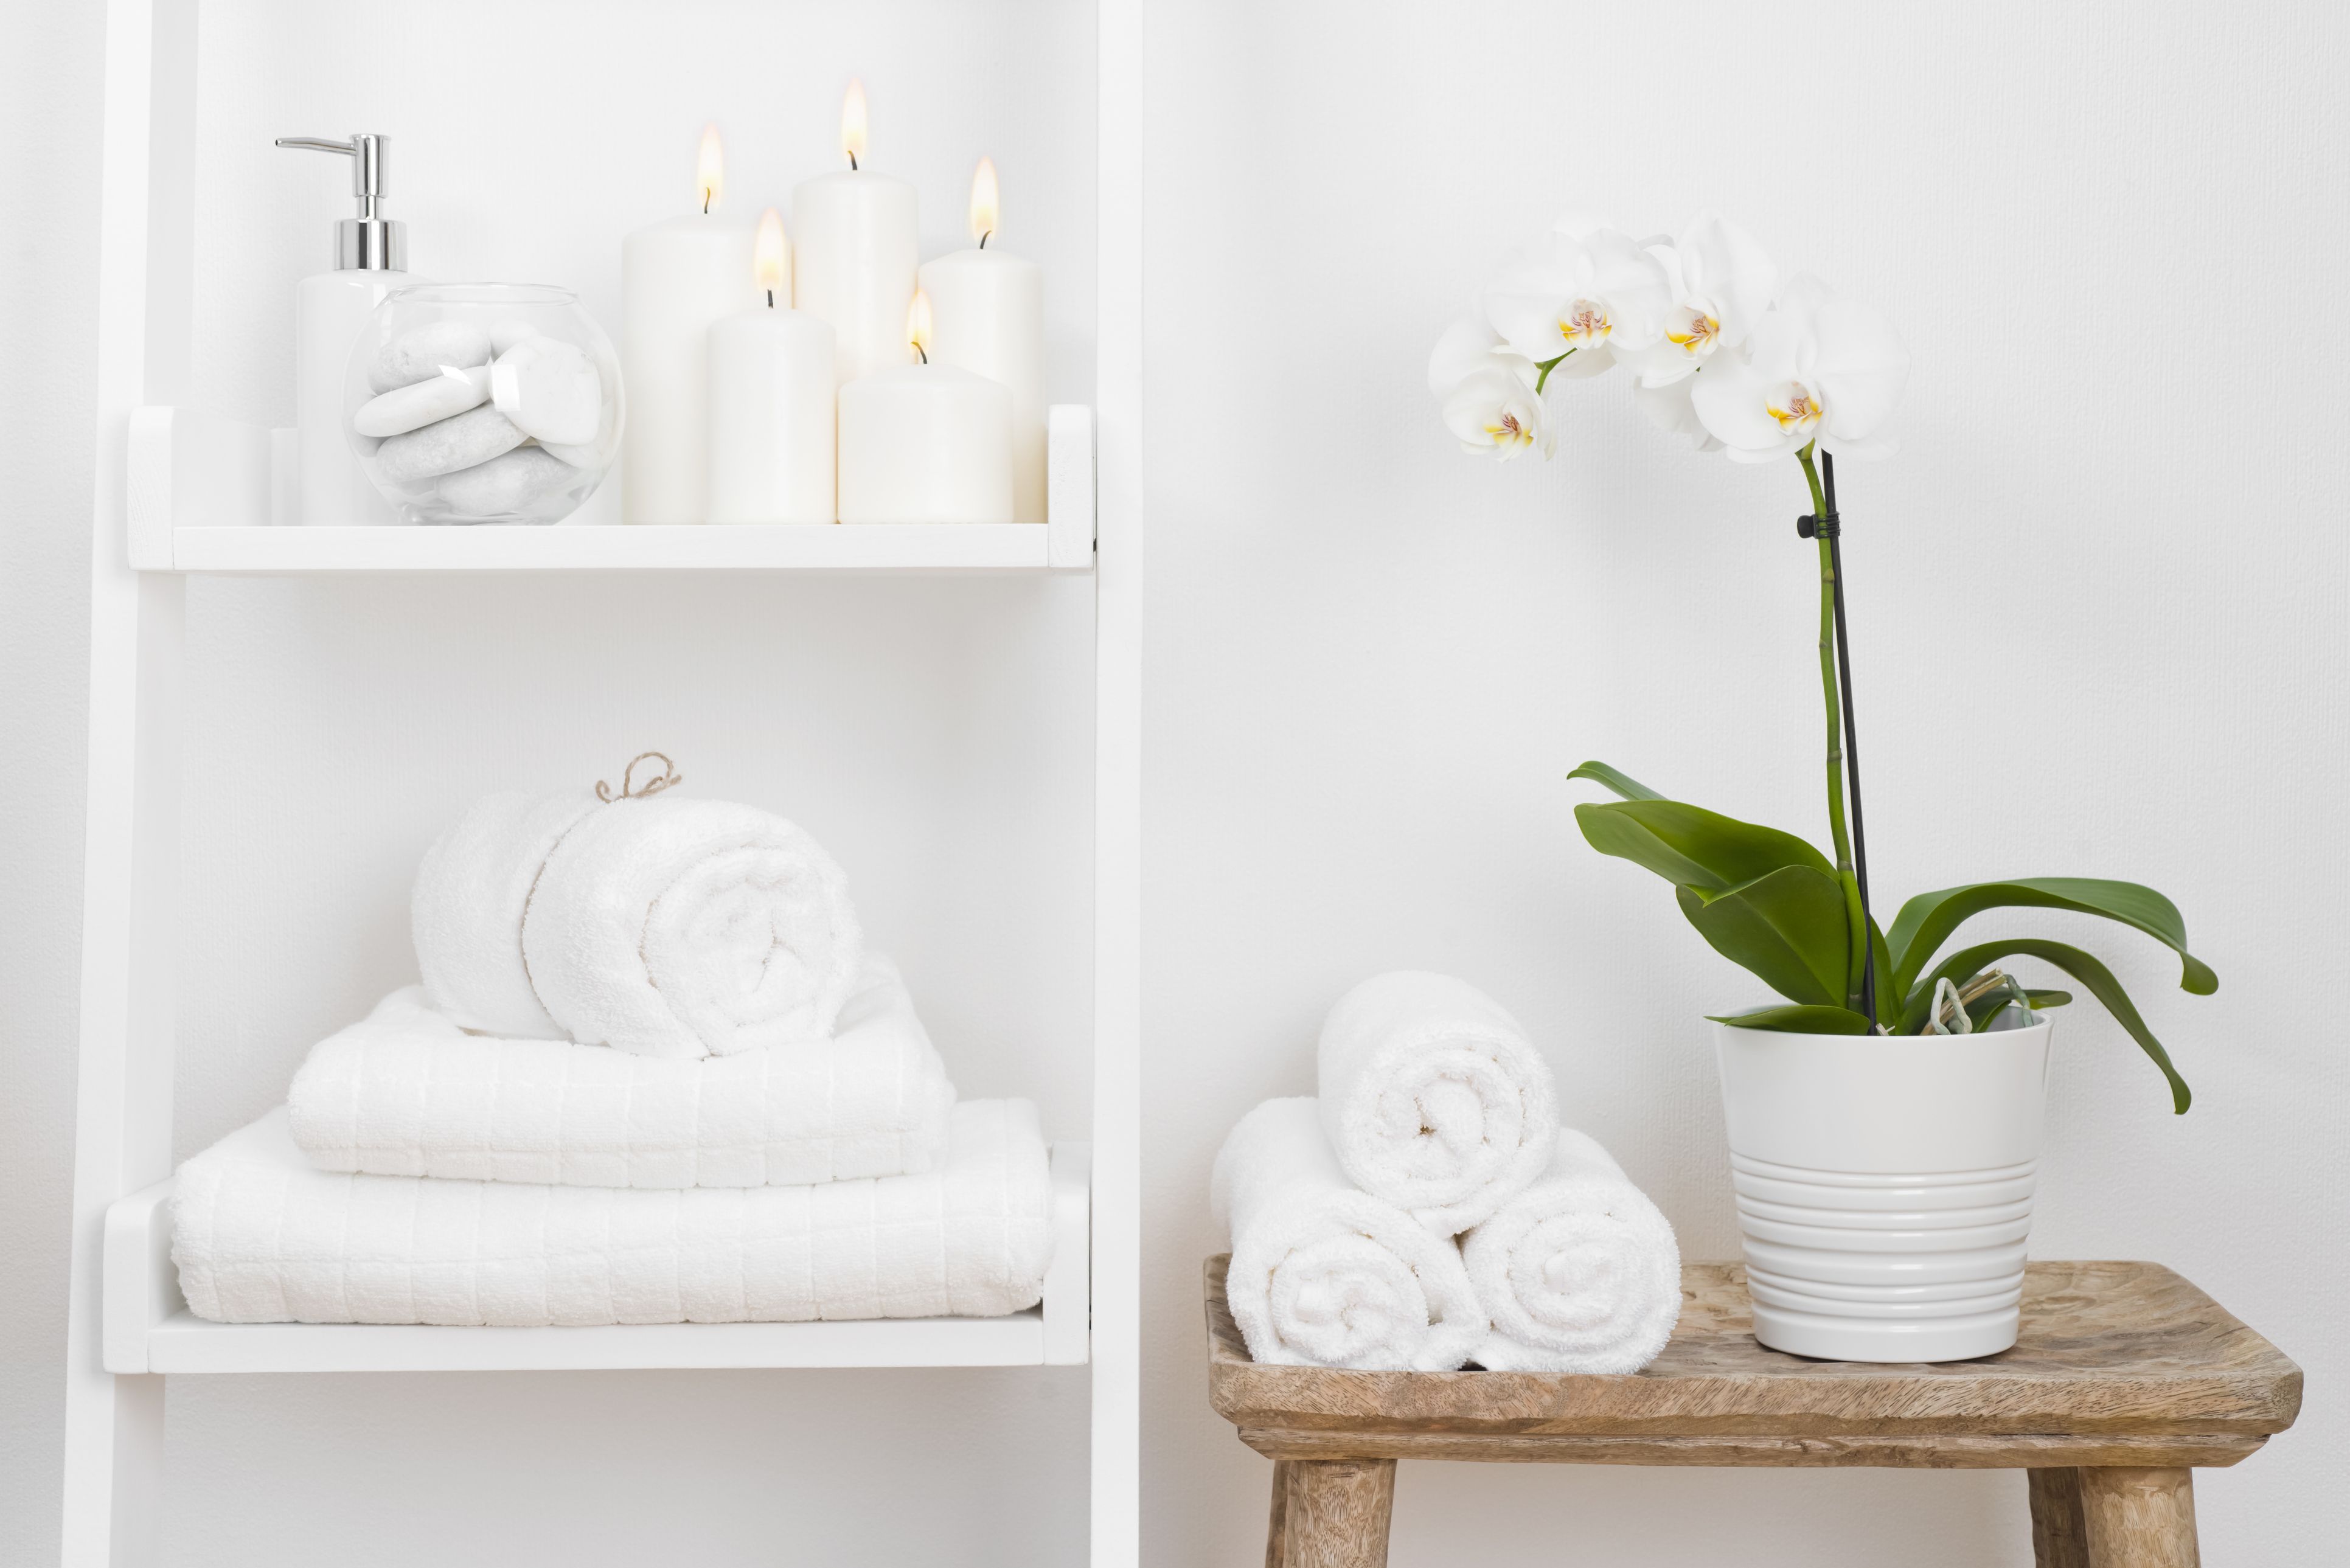 Bath Sheet vs Bath Towel: What is the Difference?